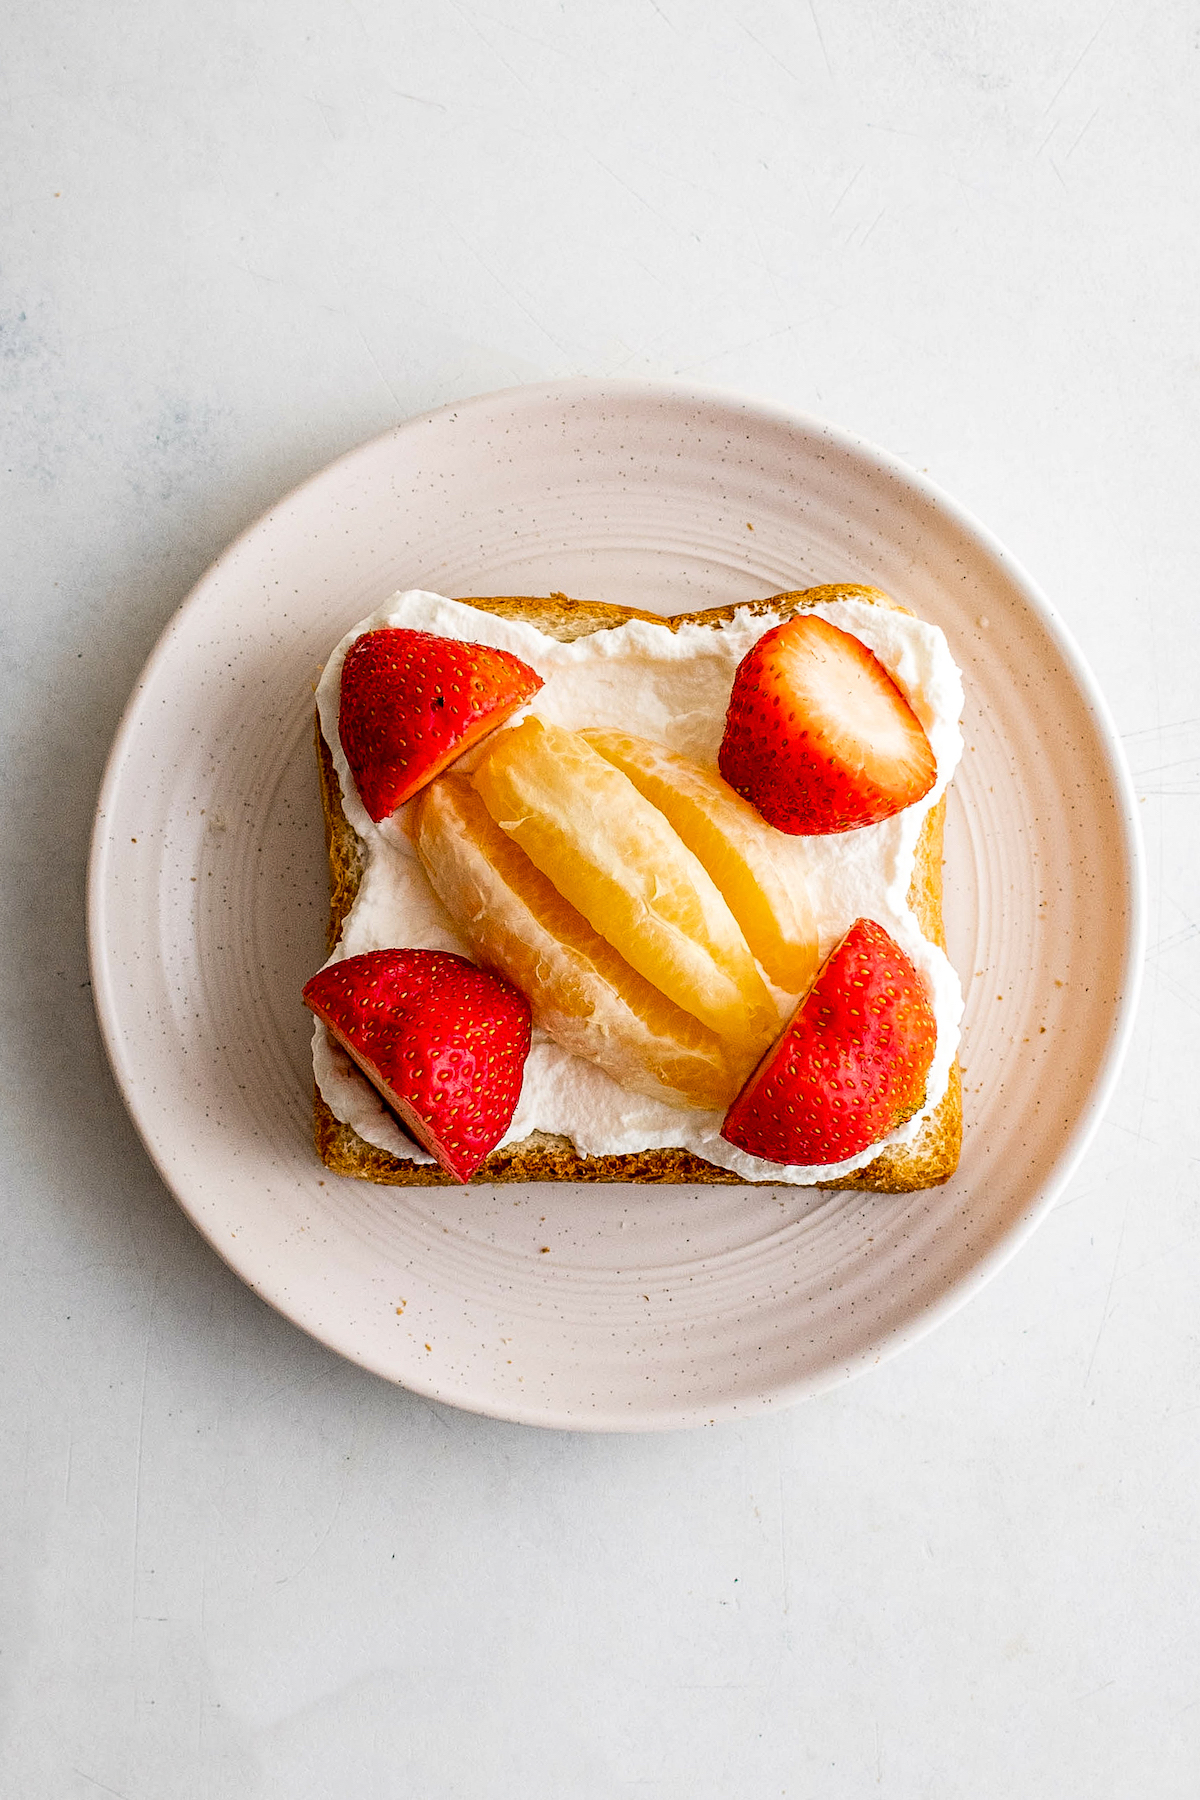 A piece of sandwich bread topped with whipped cream, strawberries, and orange segments.